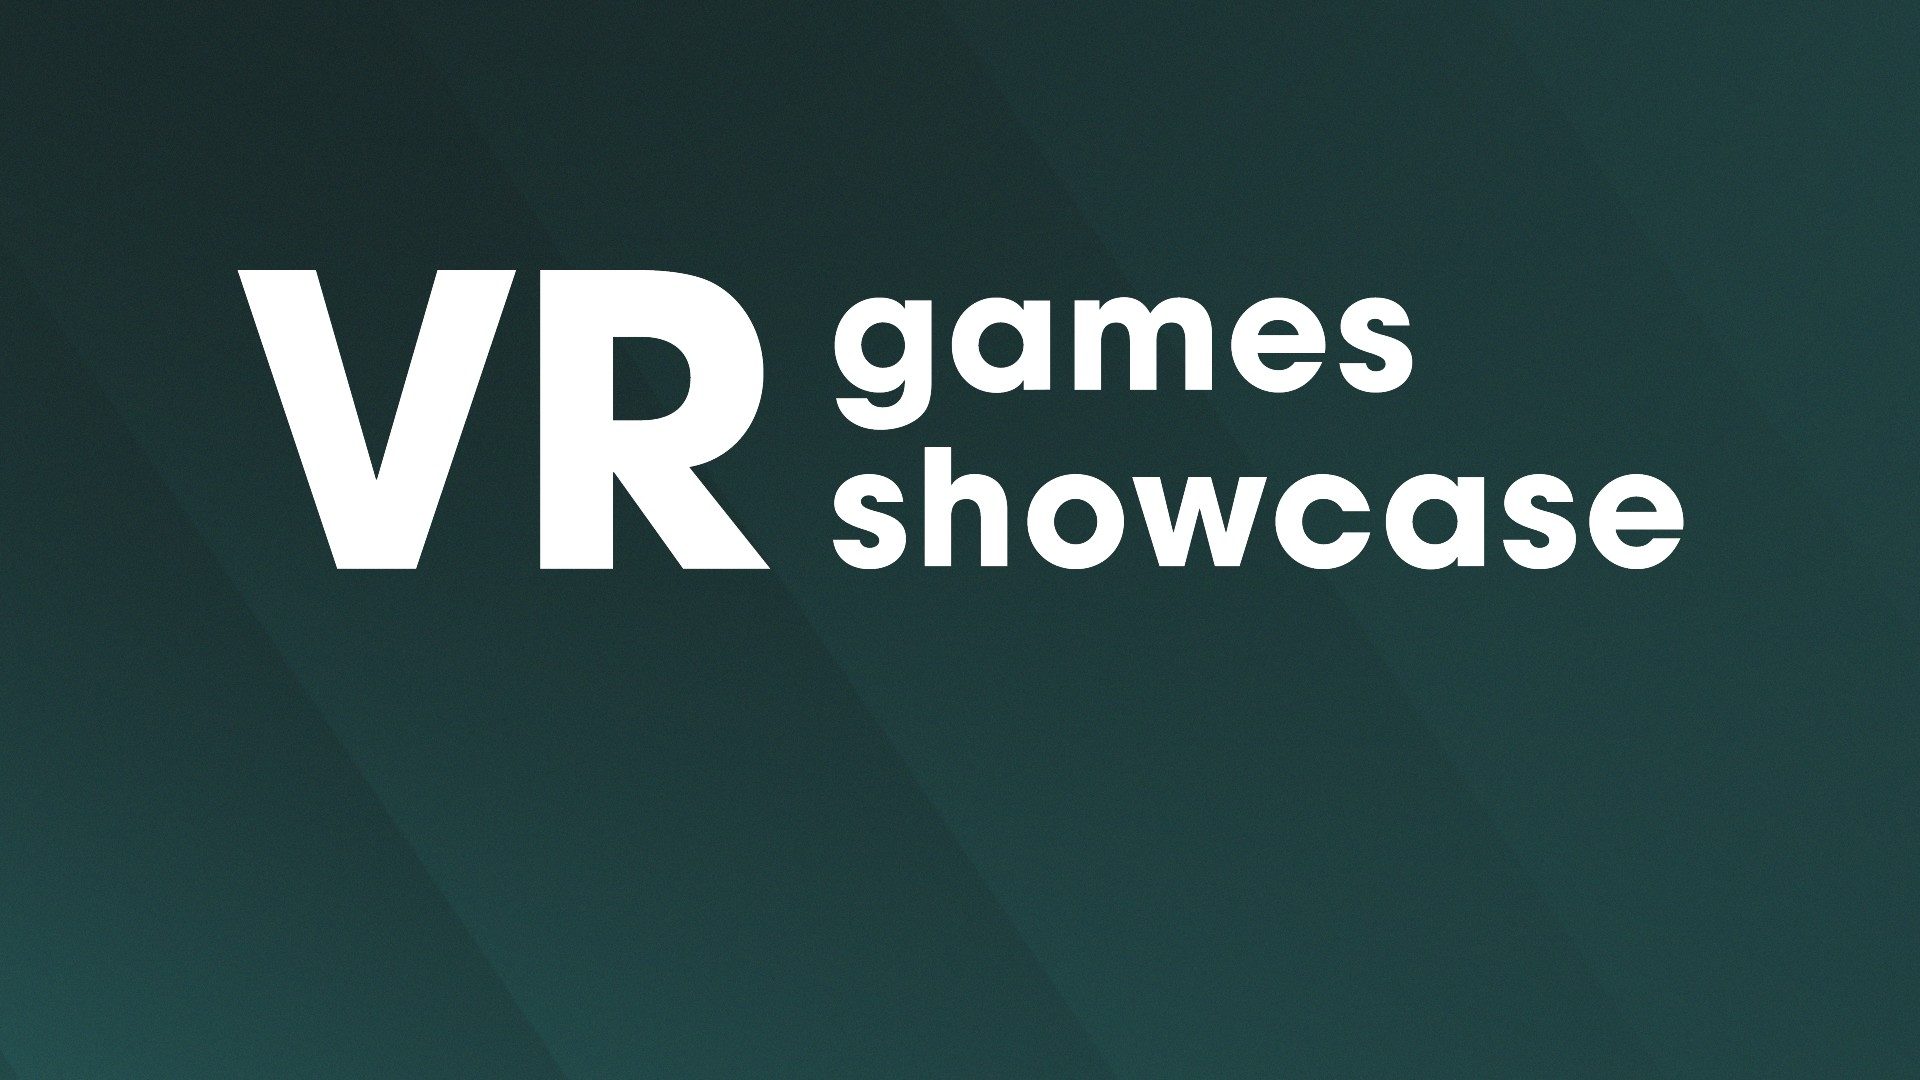 New VR Games Showcase Promises “AAA” Reveals Next Month for Quest, PSVR 2, & PC VR